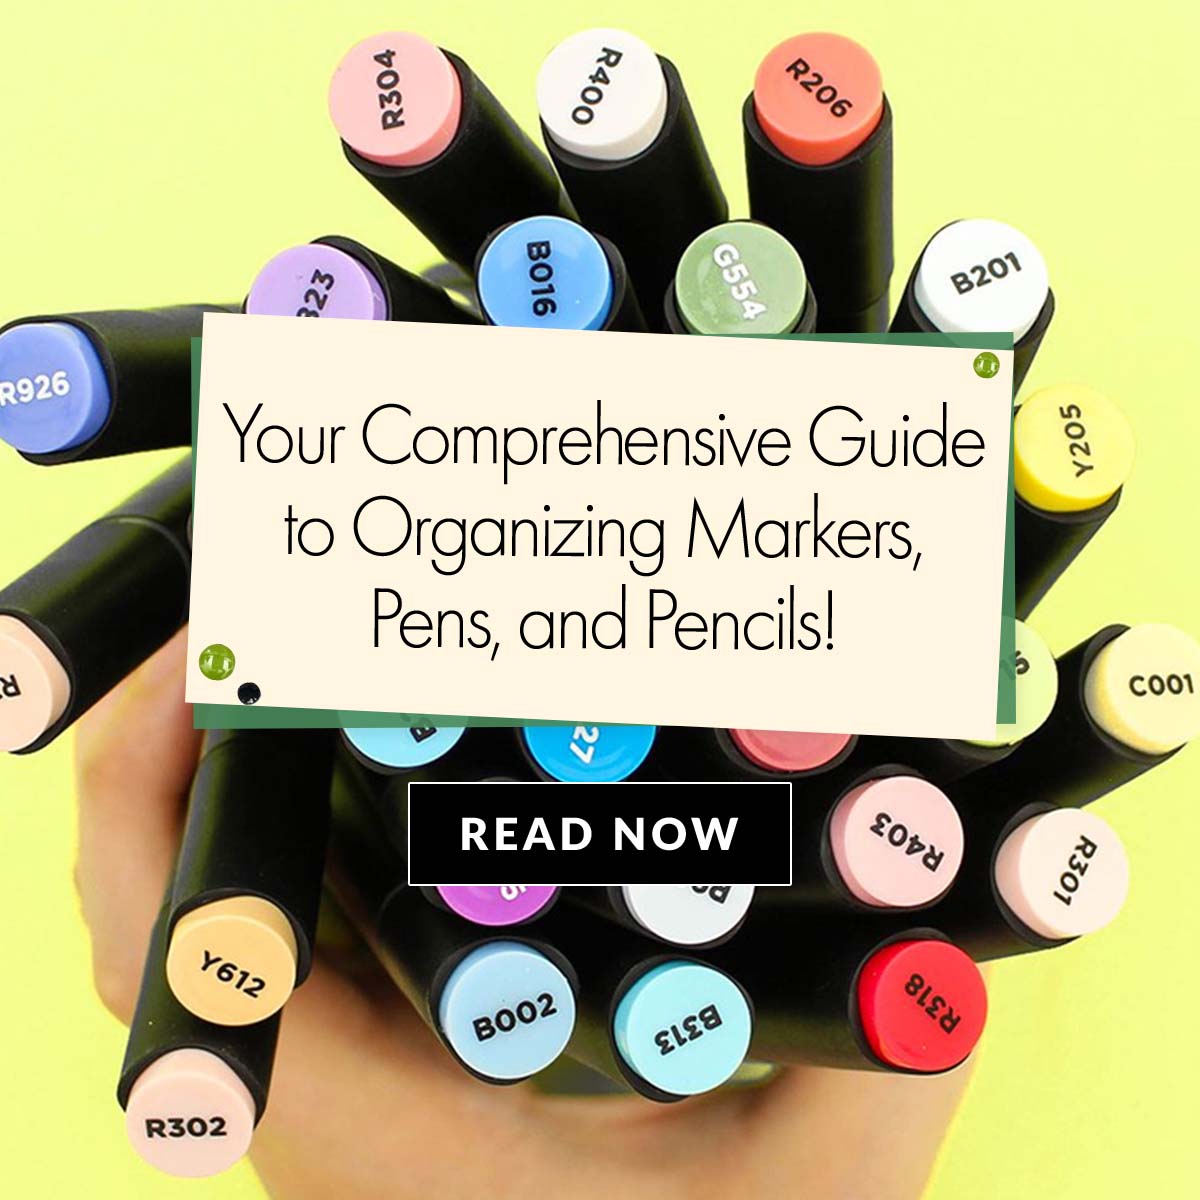 How to Organize Markers, Pens, and Pencils: A Comprehensive Guide